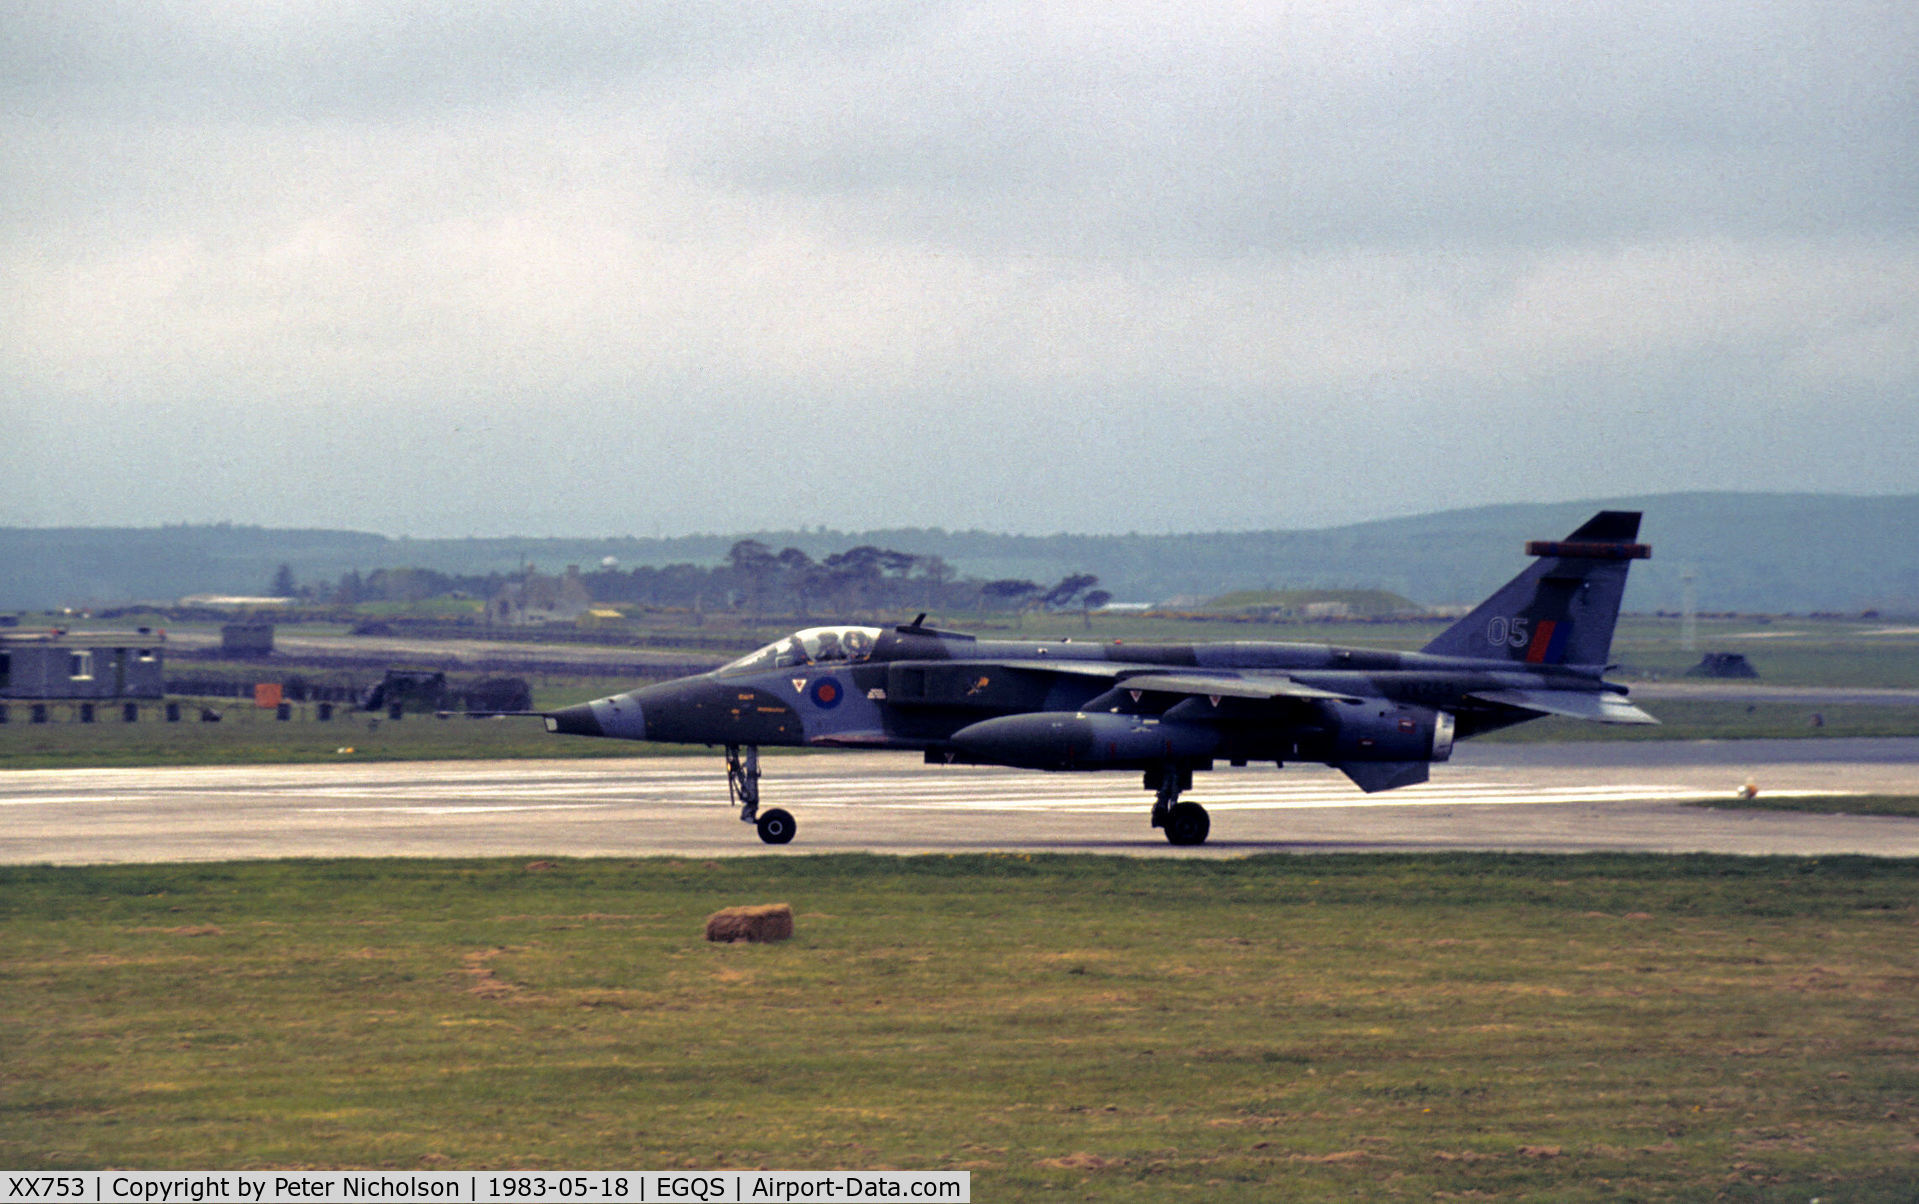 XX753, 1975 Sepecat Jaguar GR.1 C/N S.50, Jaguar GR.1 of 226 Operational Conversion Unit taxying to Runway 23 at RAF Lossiemouth in May 1983.